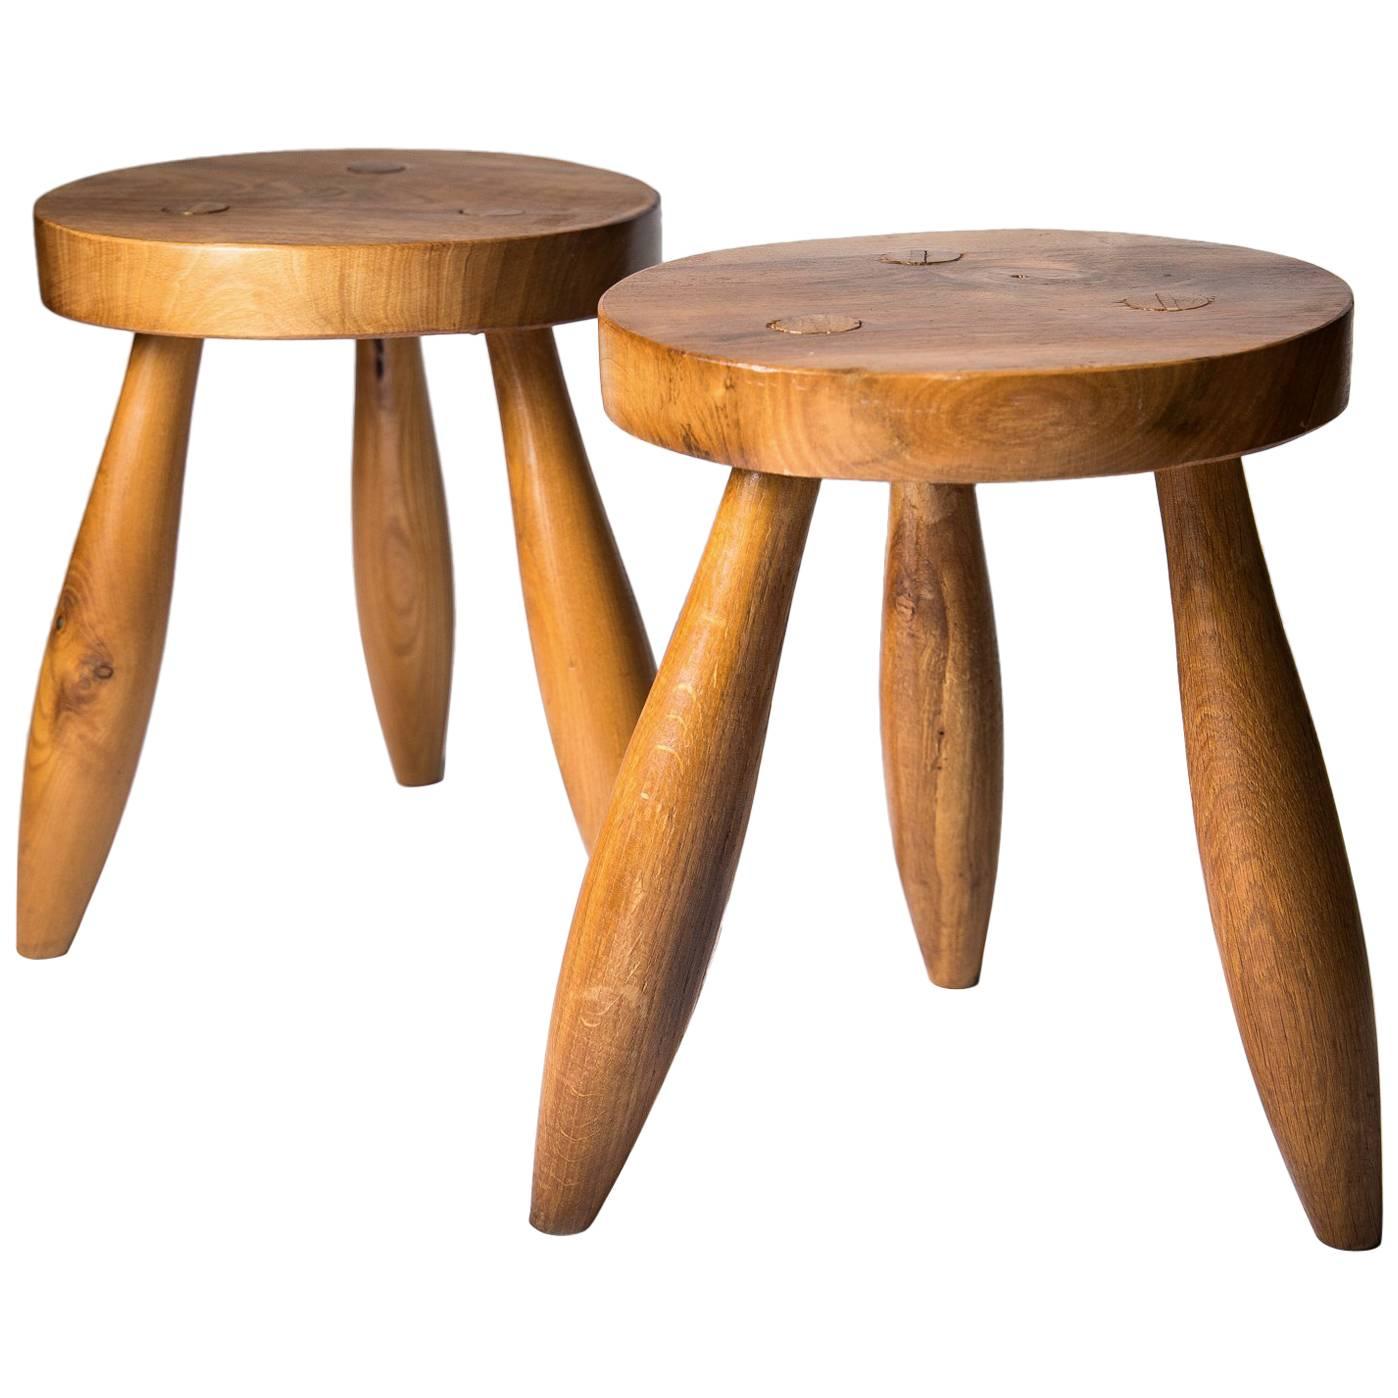 Pair of Ash Stools in the Style of Charlotte Perriand, France, circa Late 1950s